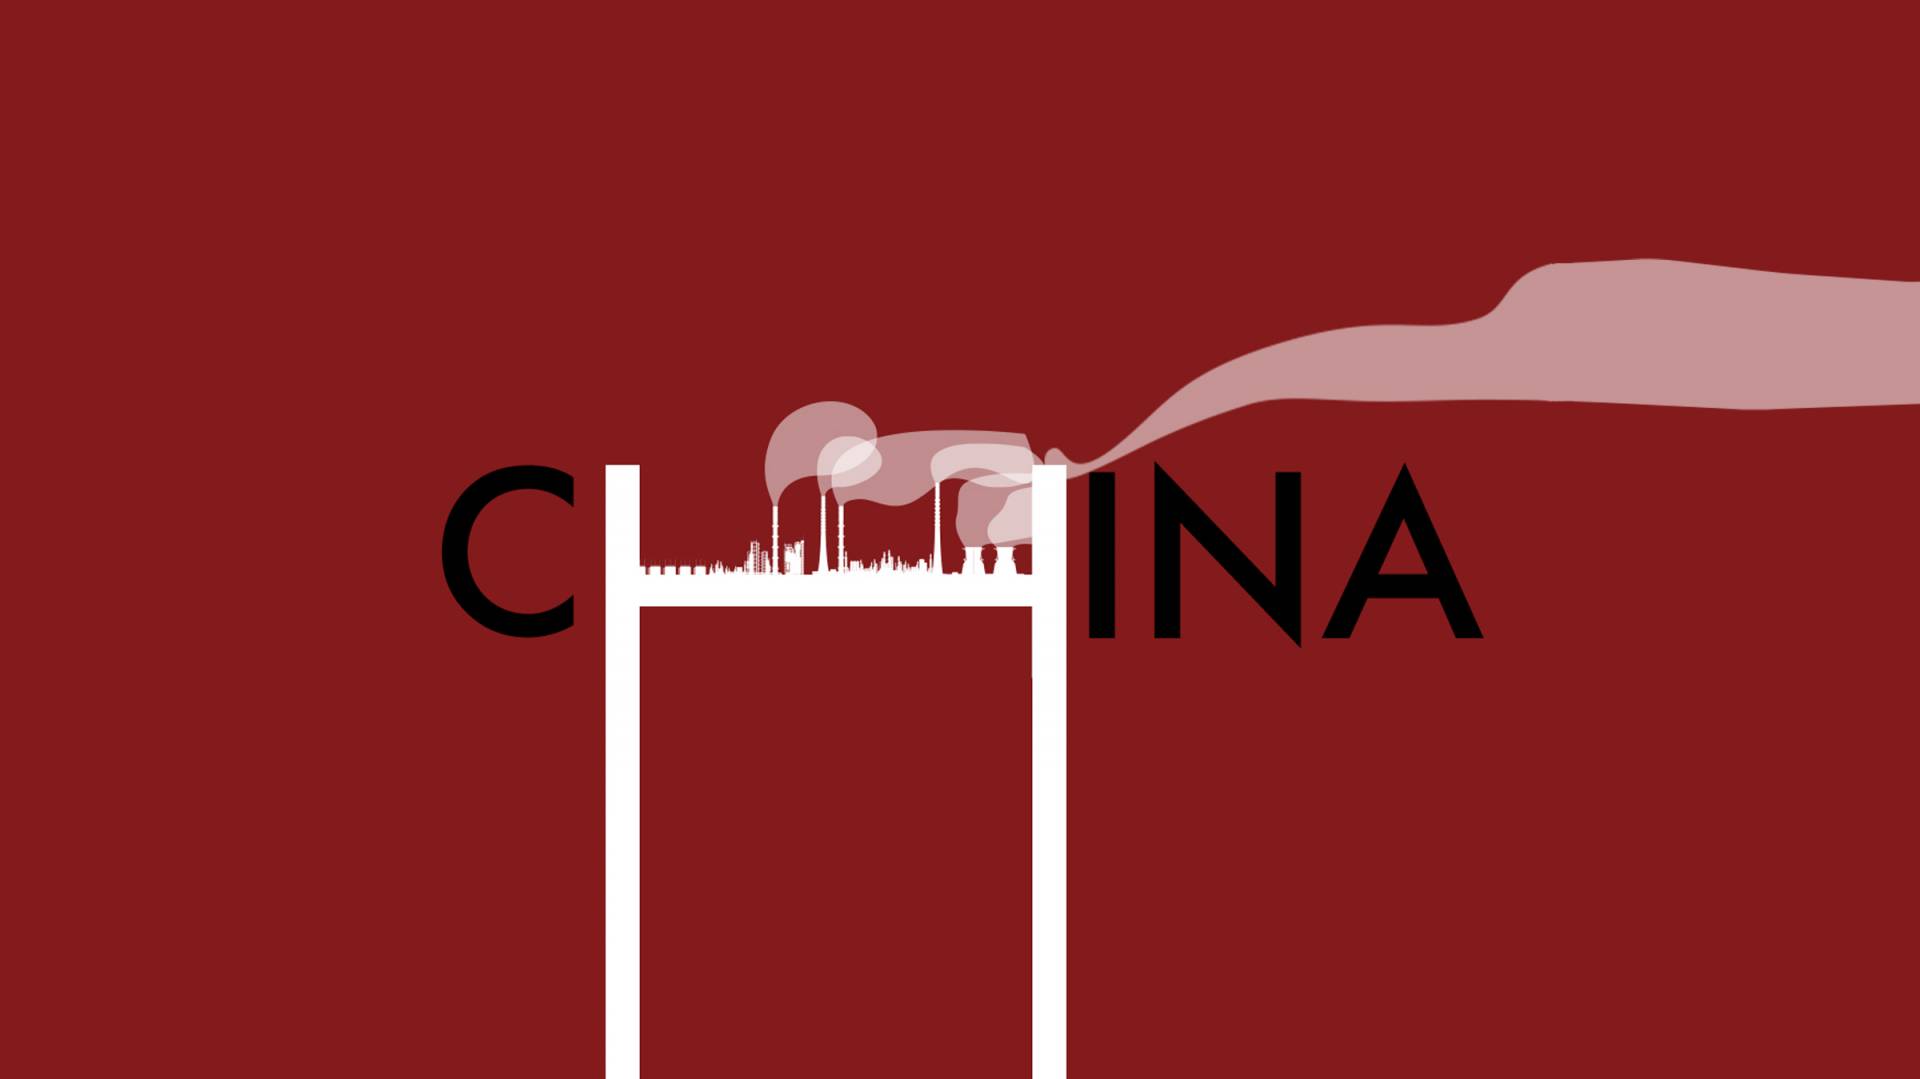 The word "CHINA" over a red background with the H making a factory producing gas into the air